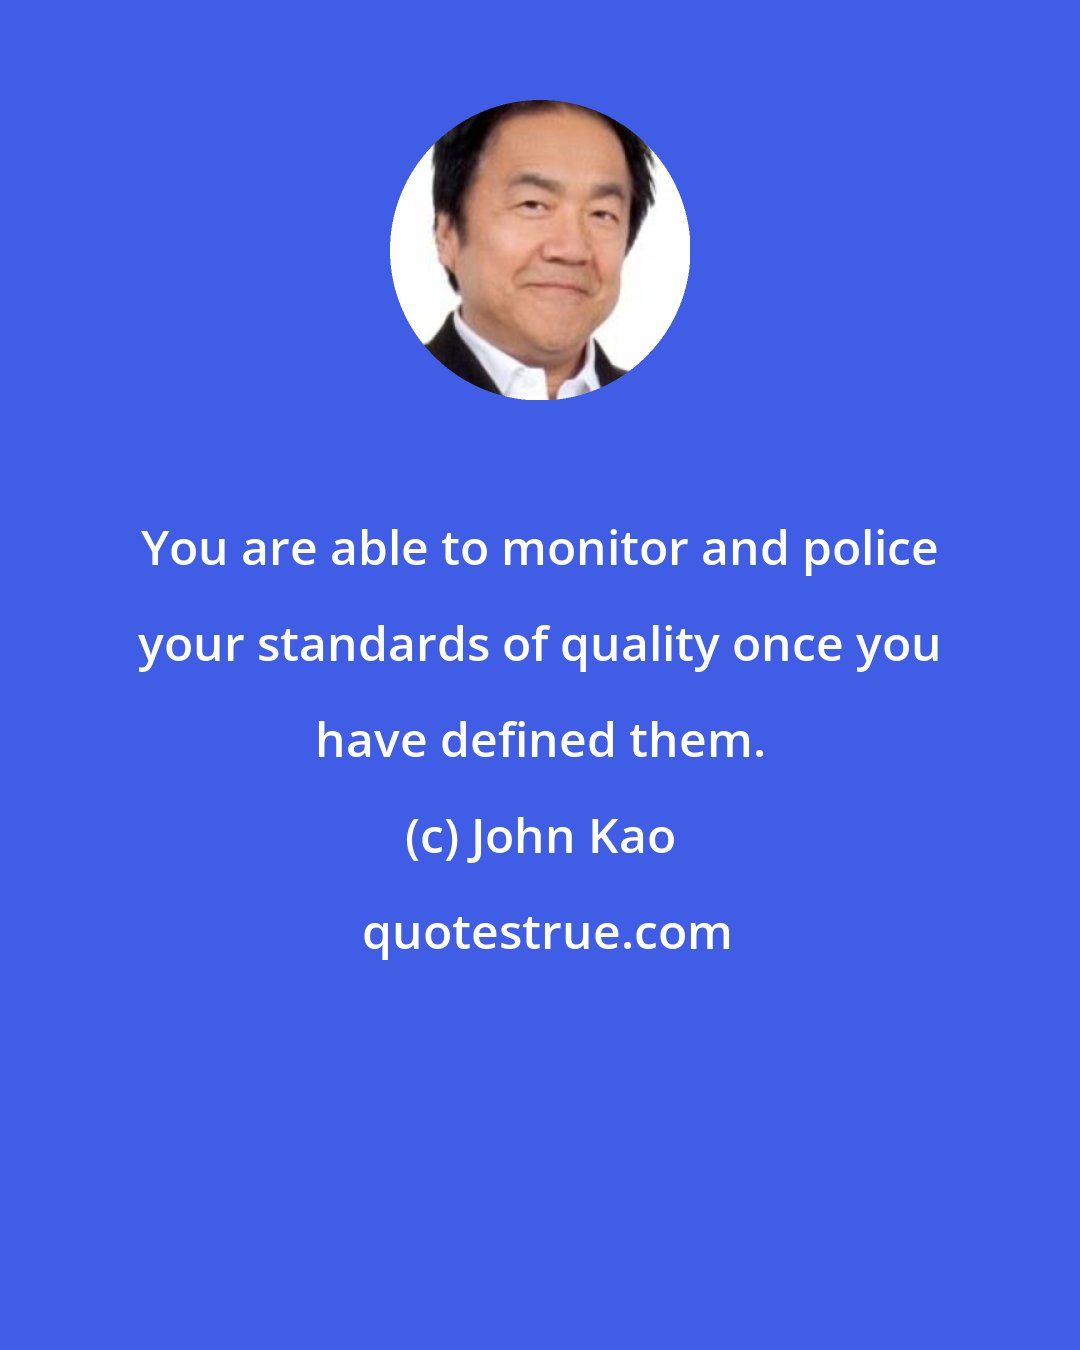 John Kao: You are able to monitor and police your standards of quality once you have defined them.